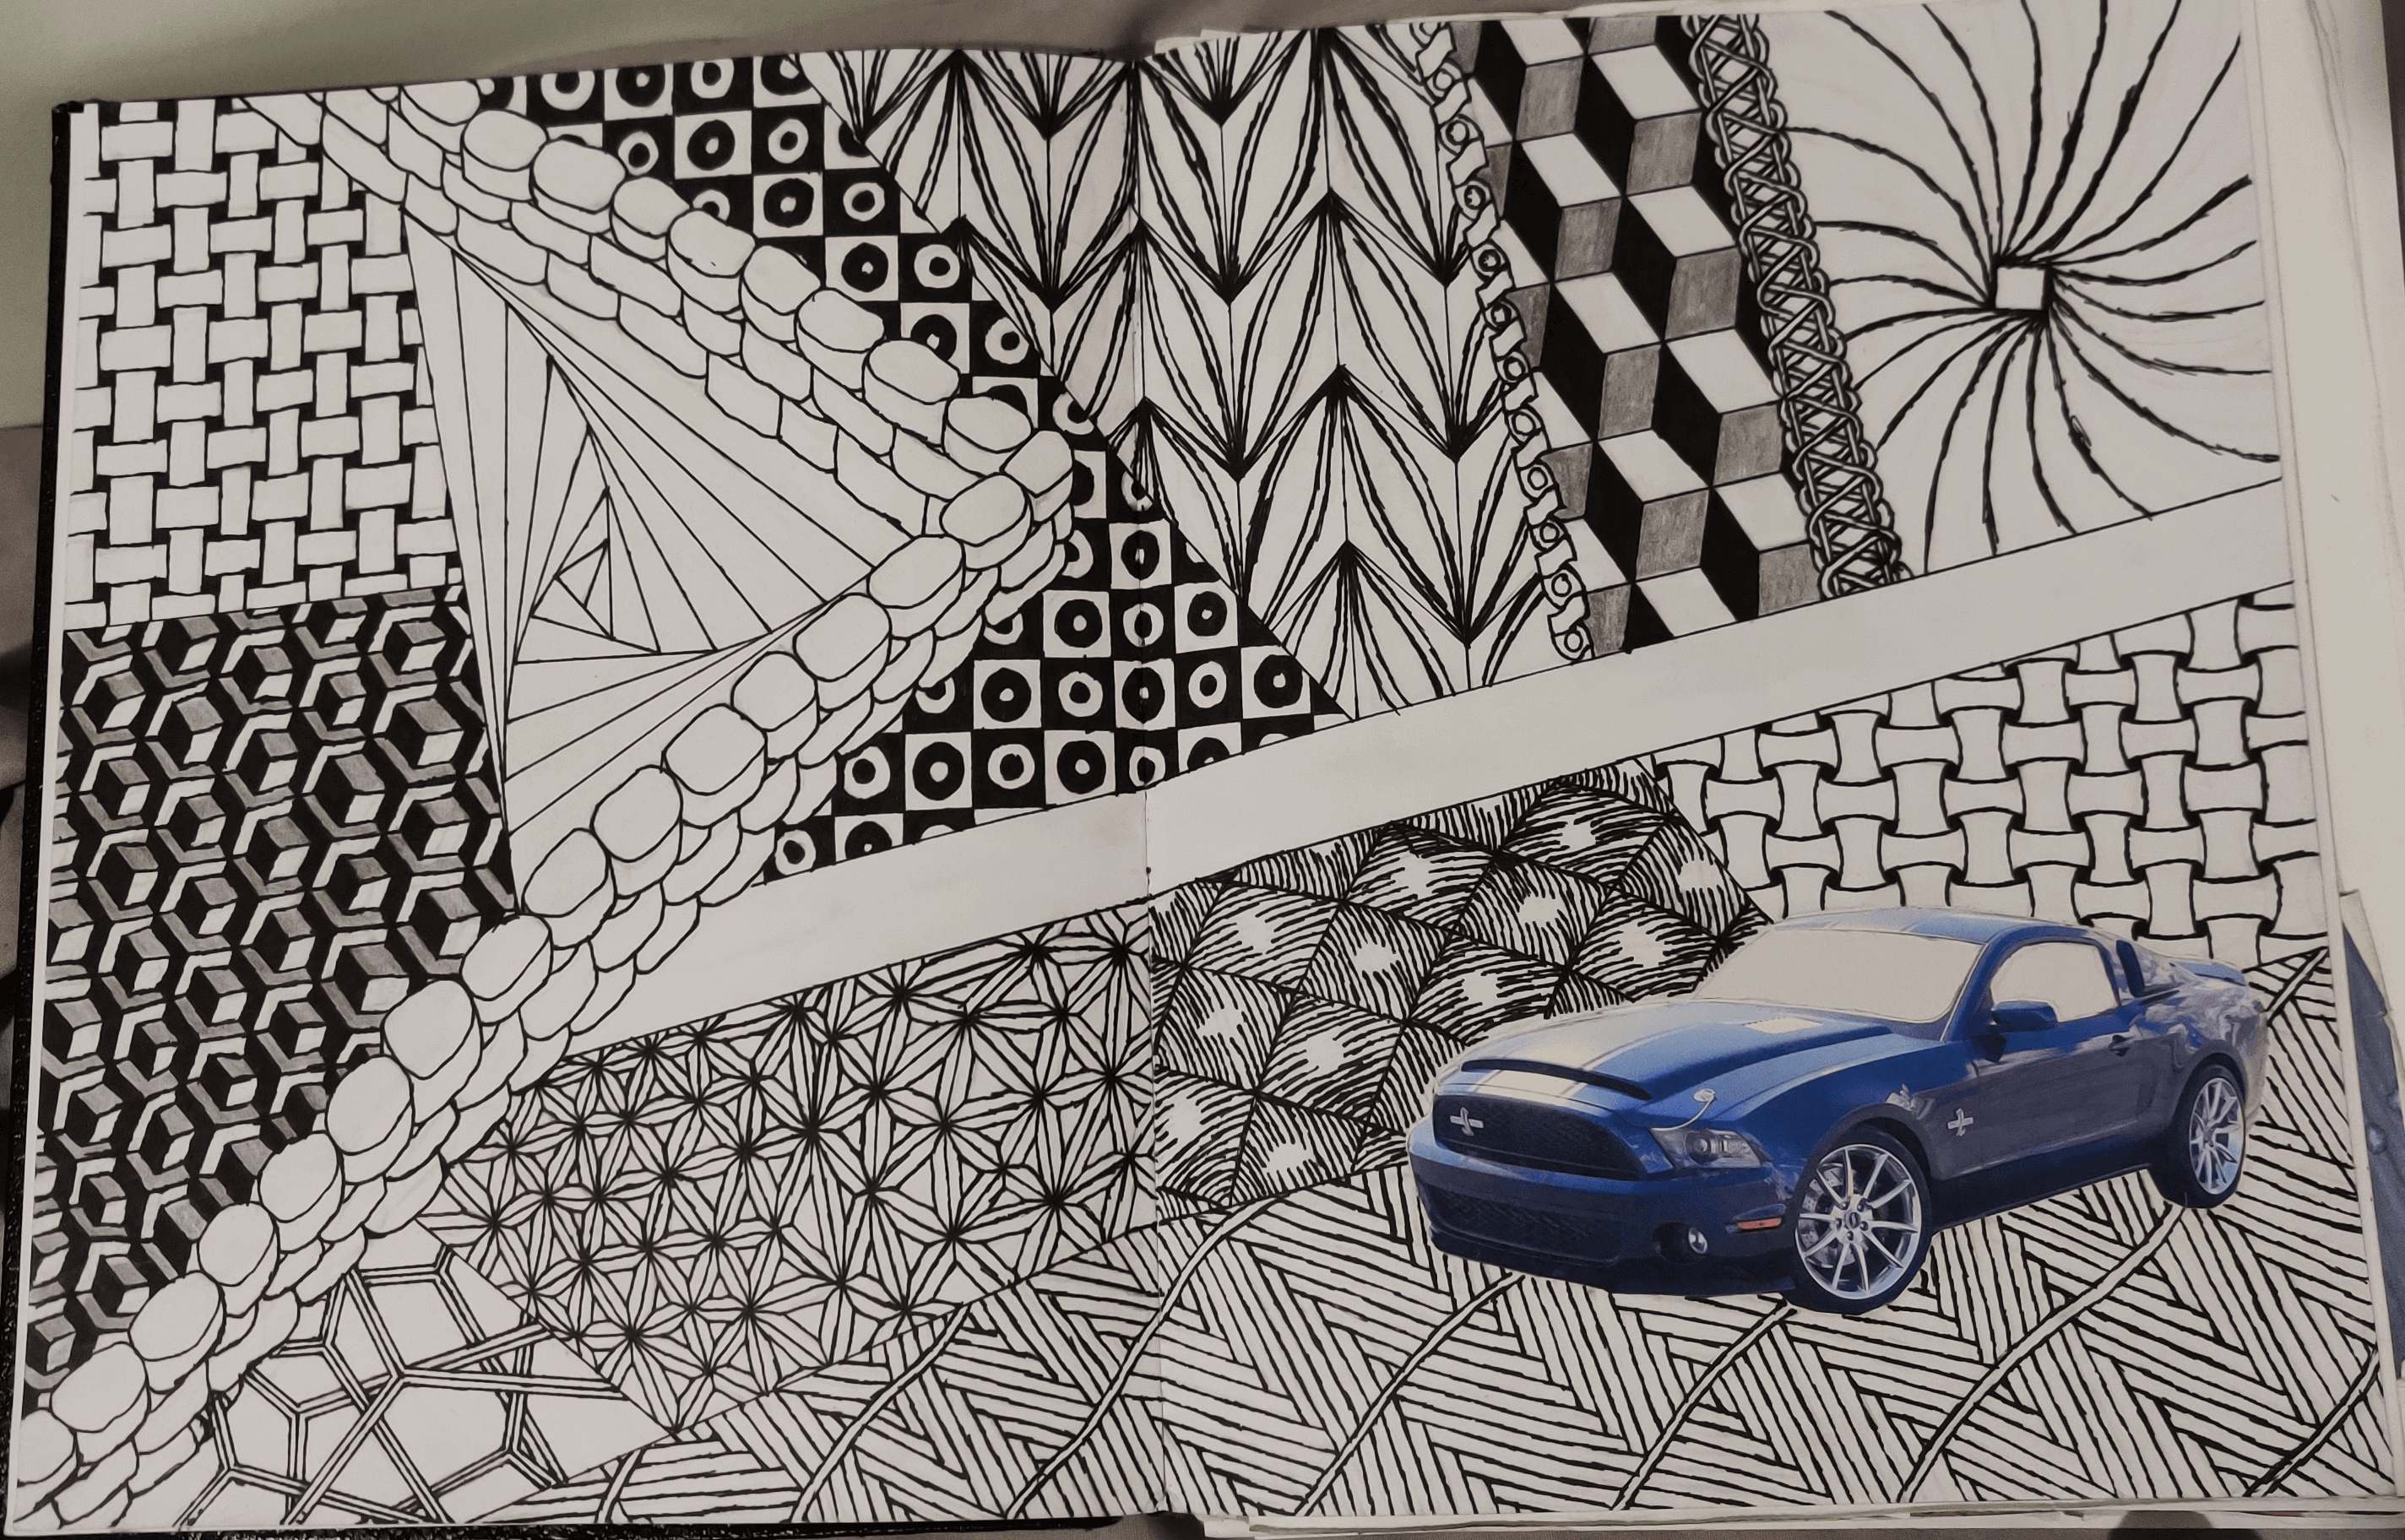 A two-page Zentangle drawing with 17 or so different Zentangle patterns and a cutout of a blue Mustang.